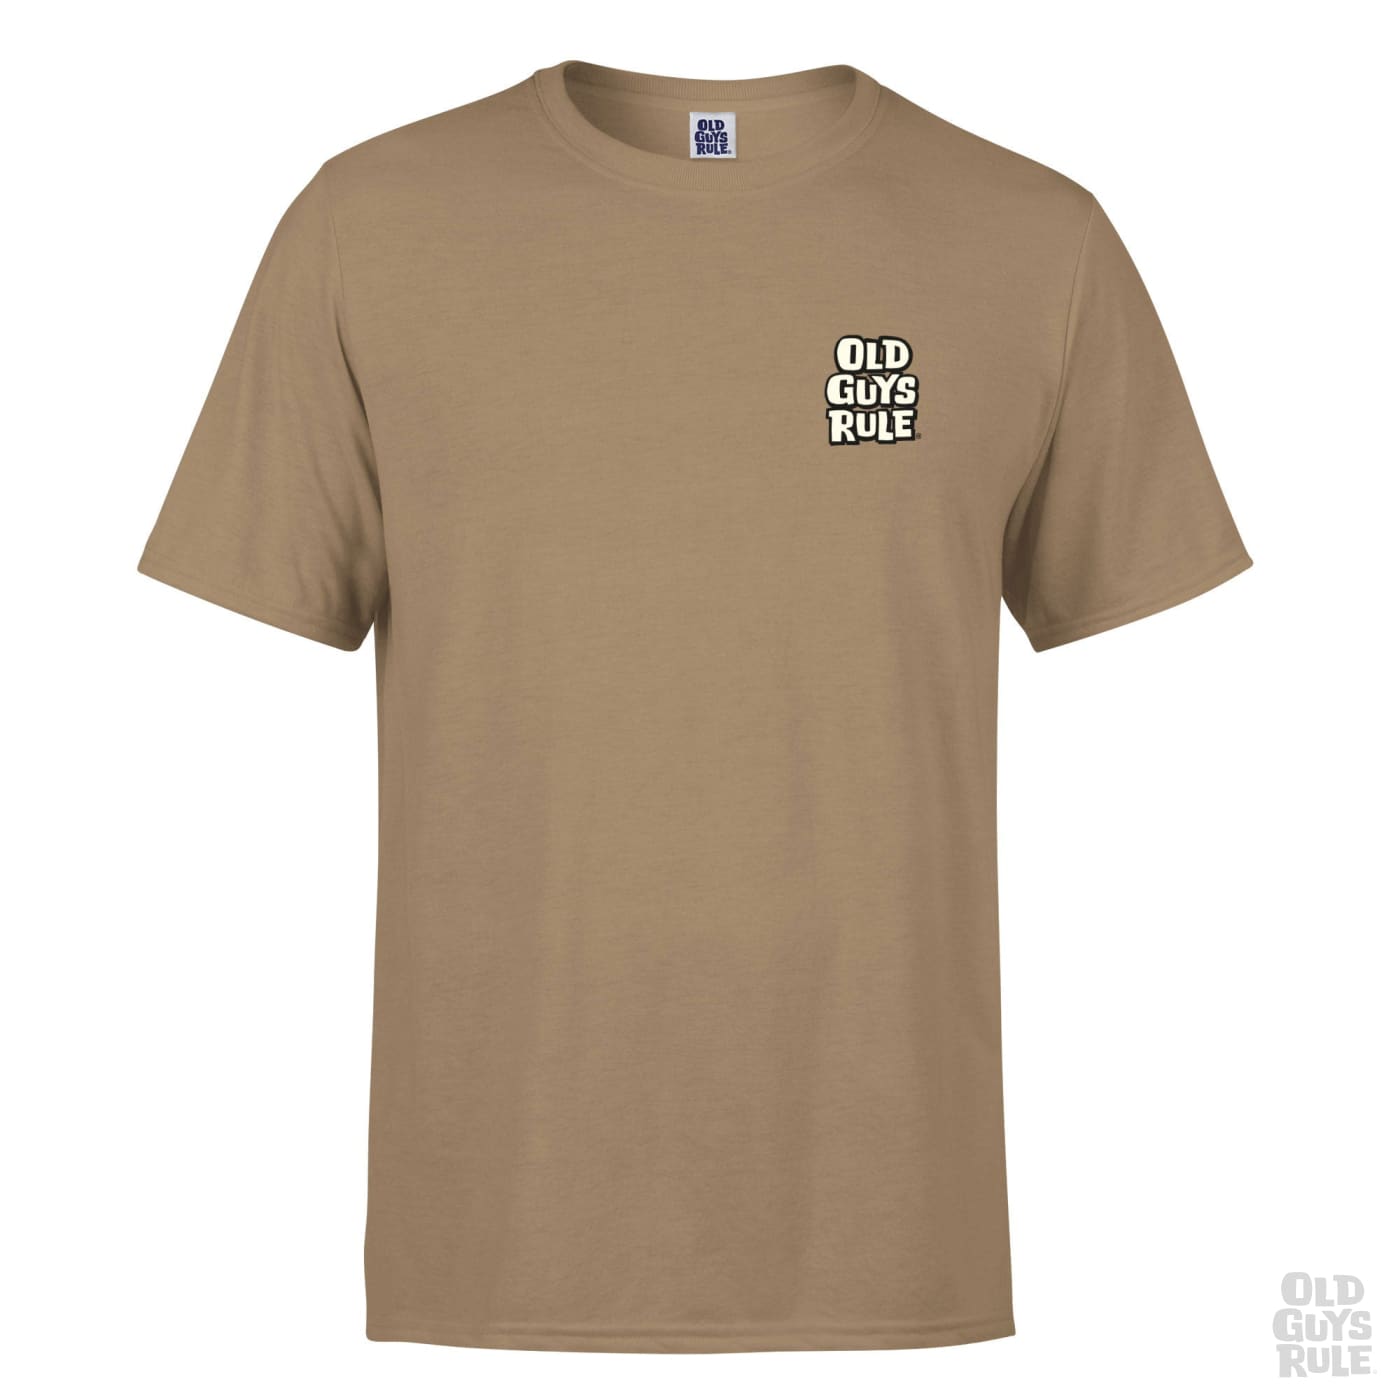 OLD GUYS RULE 'GOOD THINGS COME' T-SHIRT - TAN